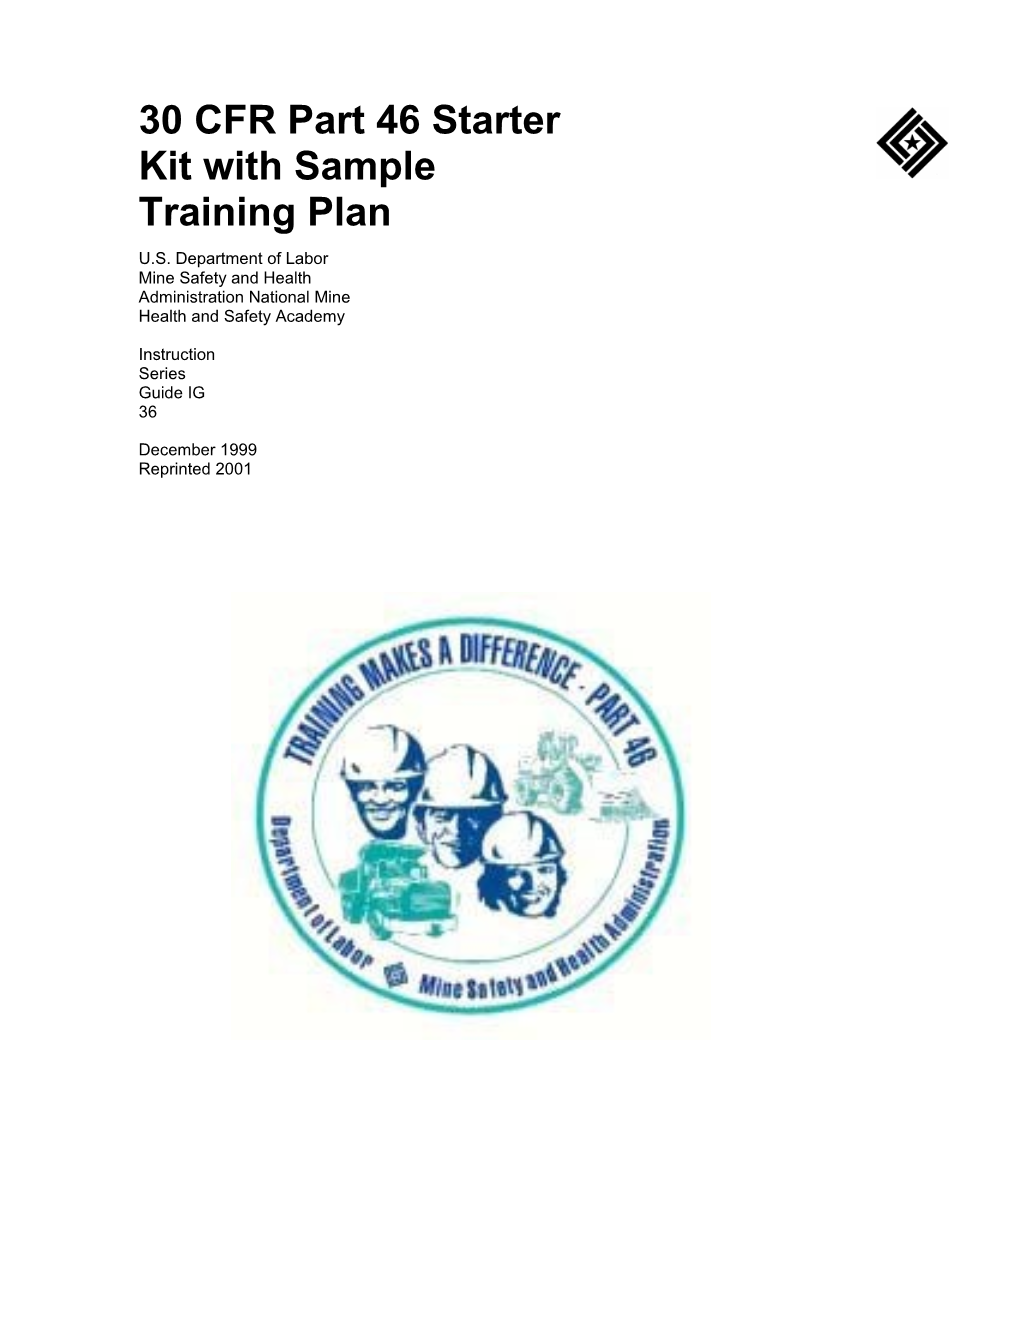 Mine Safety and Health Administration (MSHA) - 30 CFR Part 46 Starter Kit with Sample Training